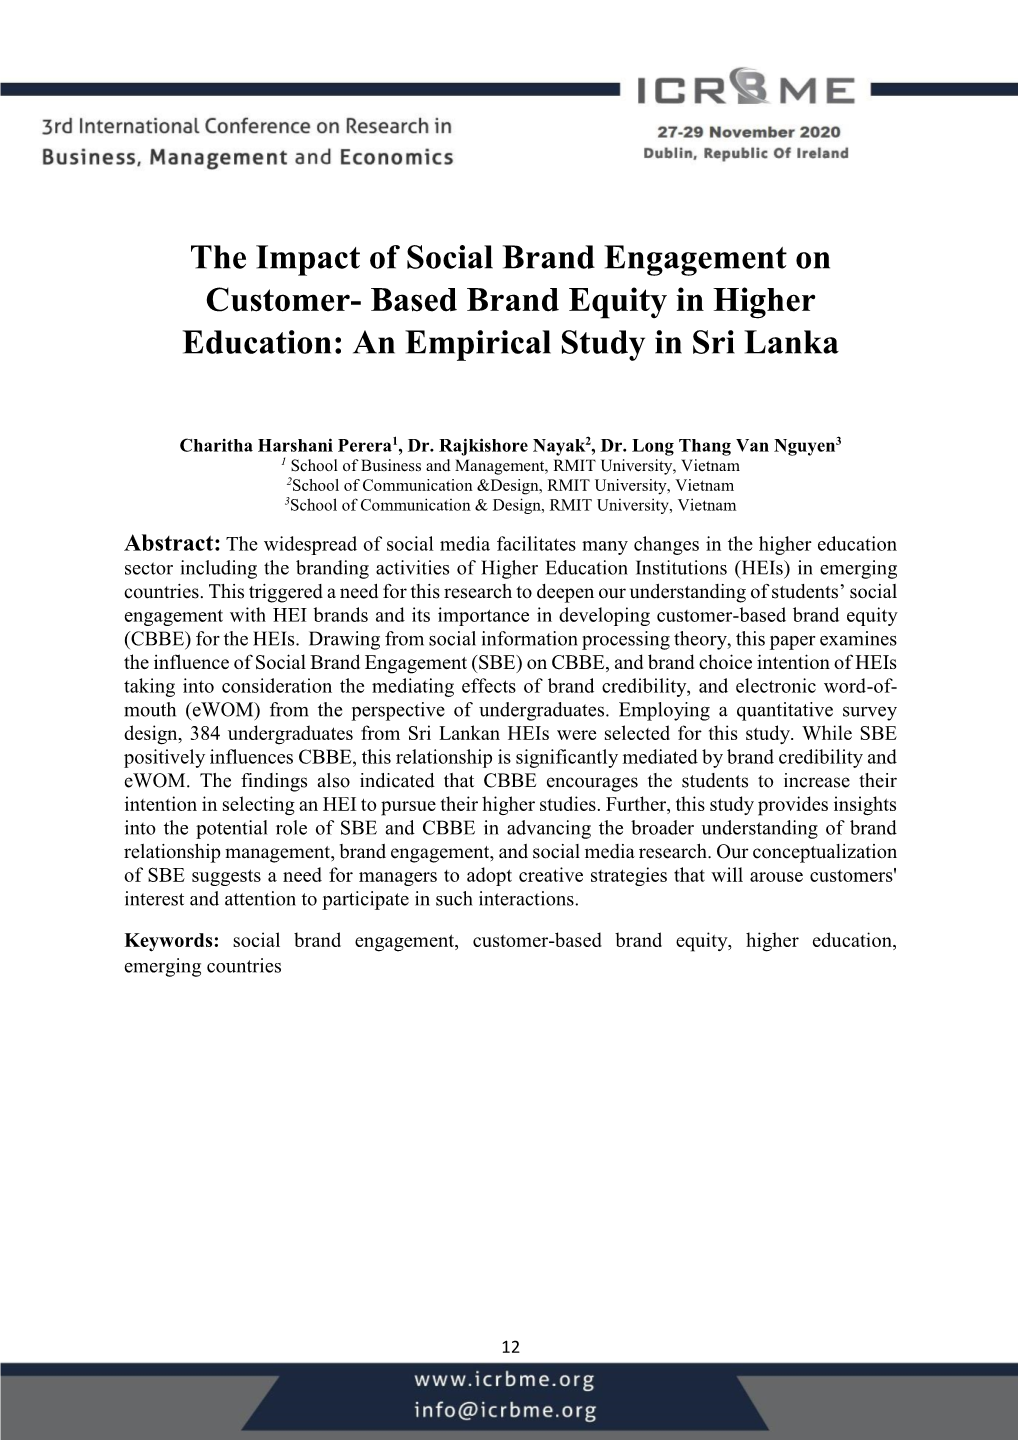 The Impact of Social Brand Engagement on Customer- Based Brand Equity in Higher Education: an Empirical Study in Sri Lanka